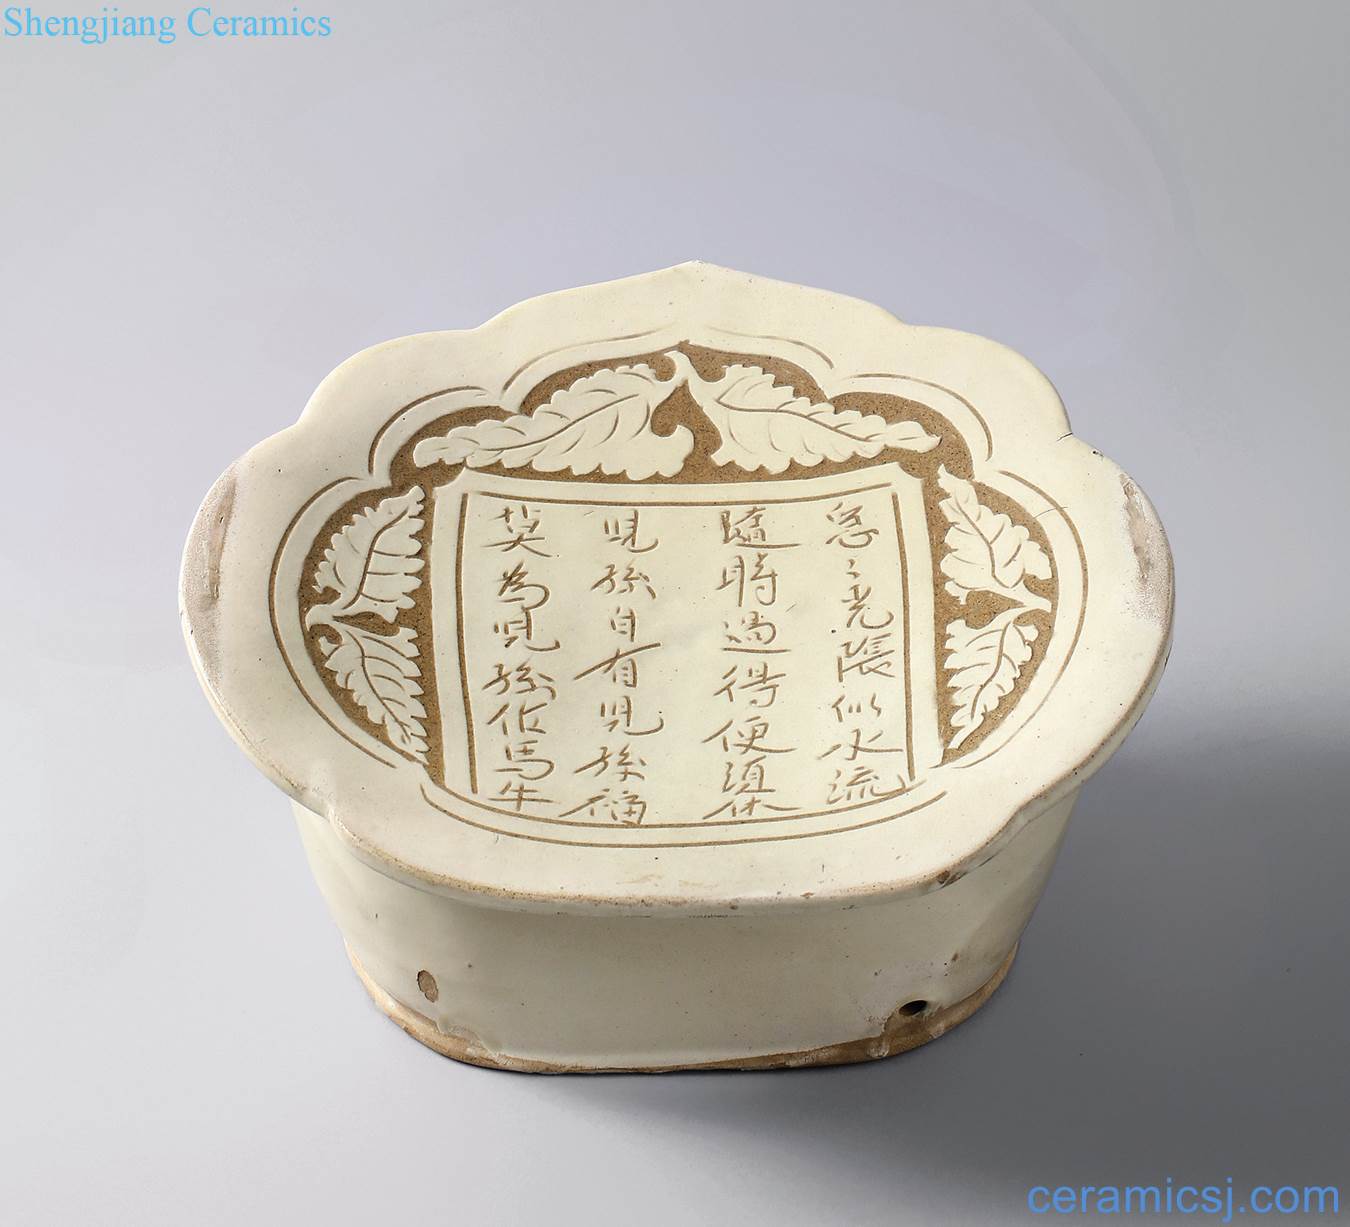 Northern song dynasty (960-1127) and gold (1115-1234), white glazed carved carved poems best shape pillow